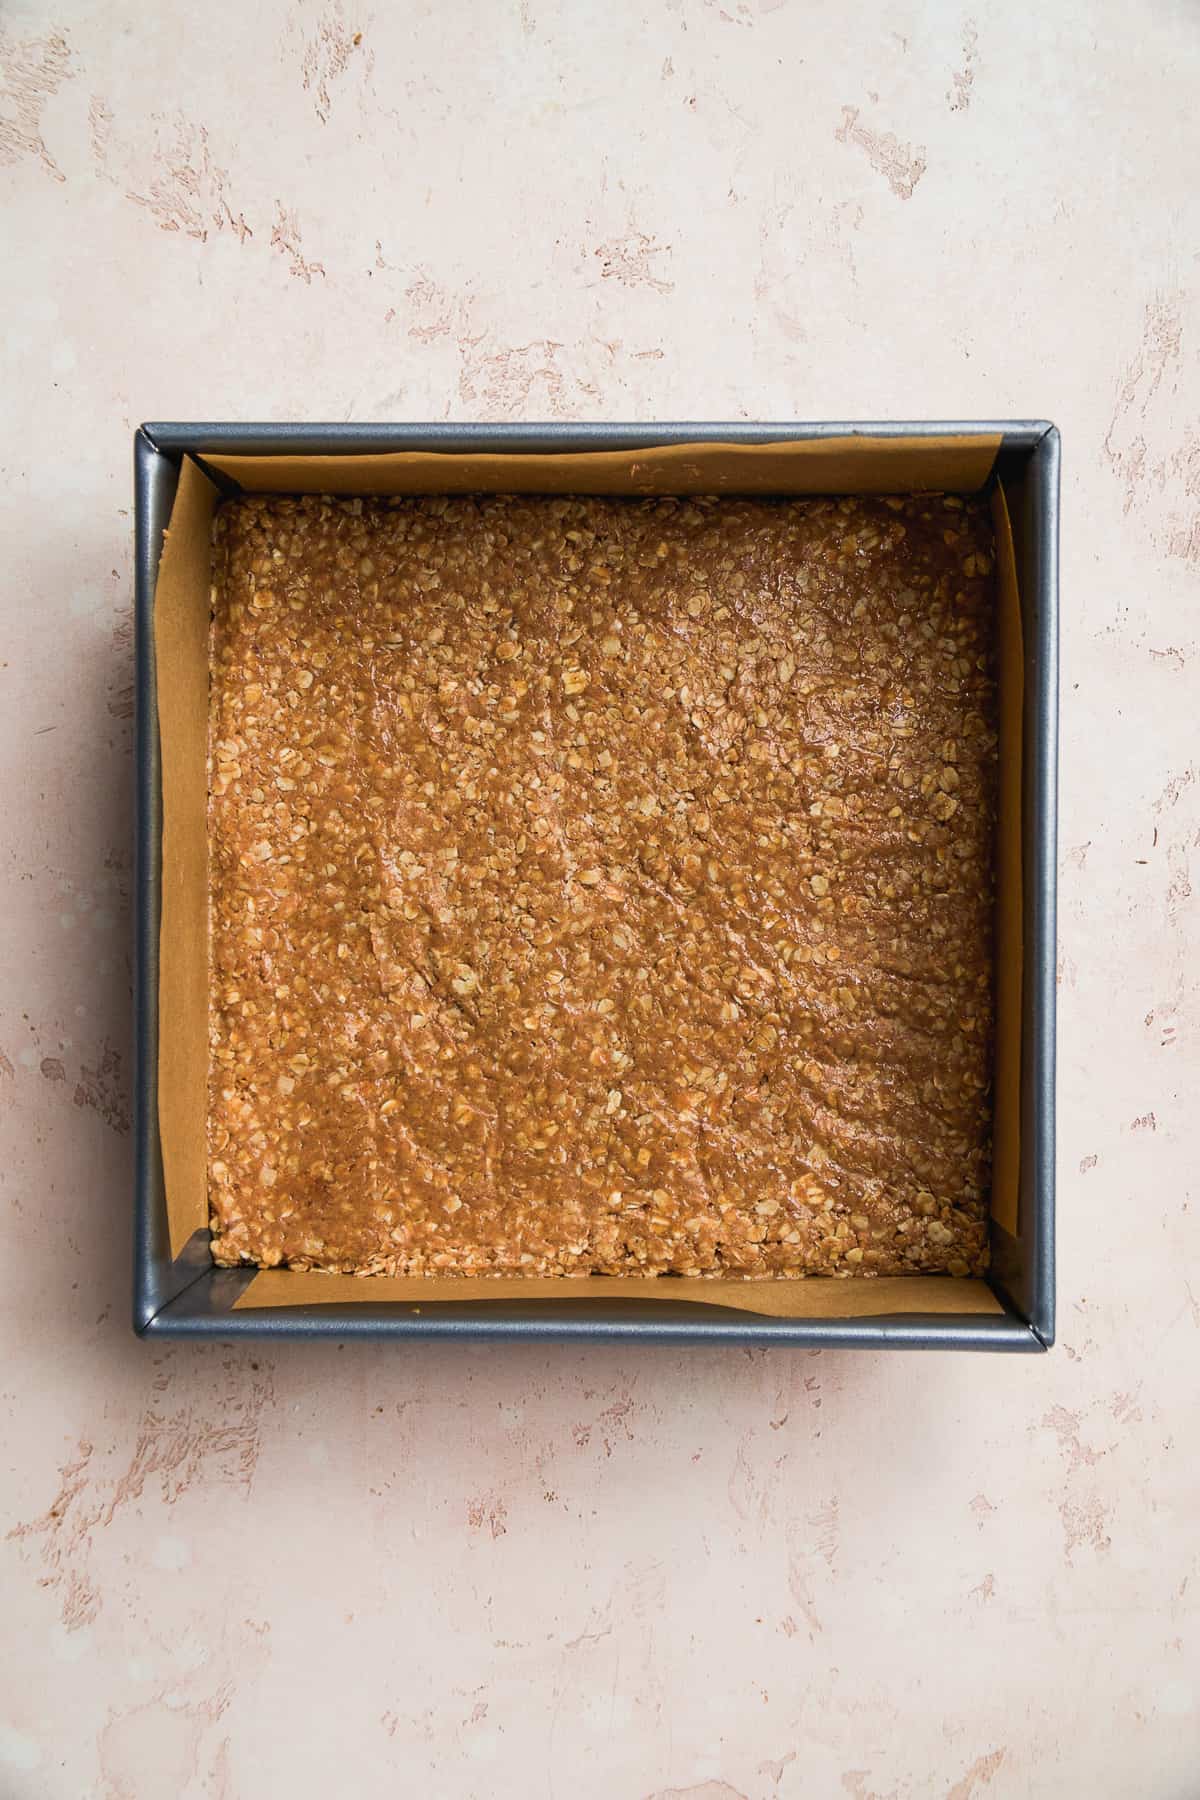 Square pan with peanut butter oats pressed into the pan.